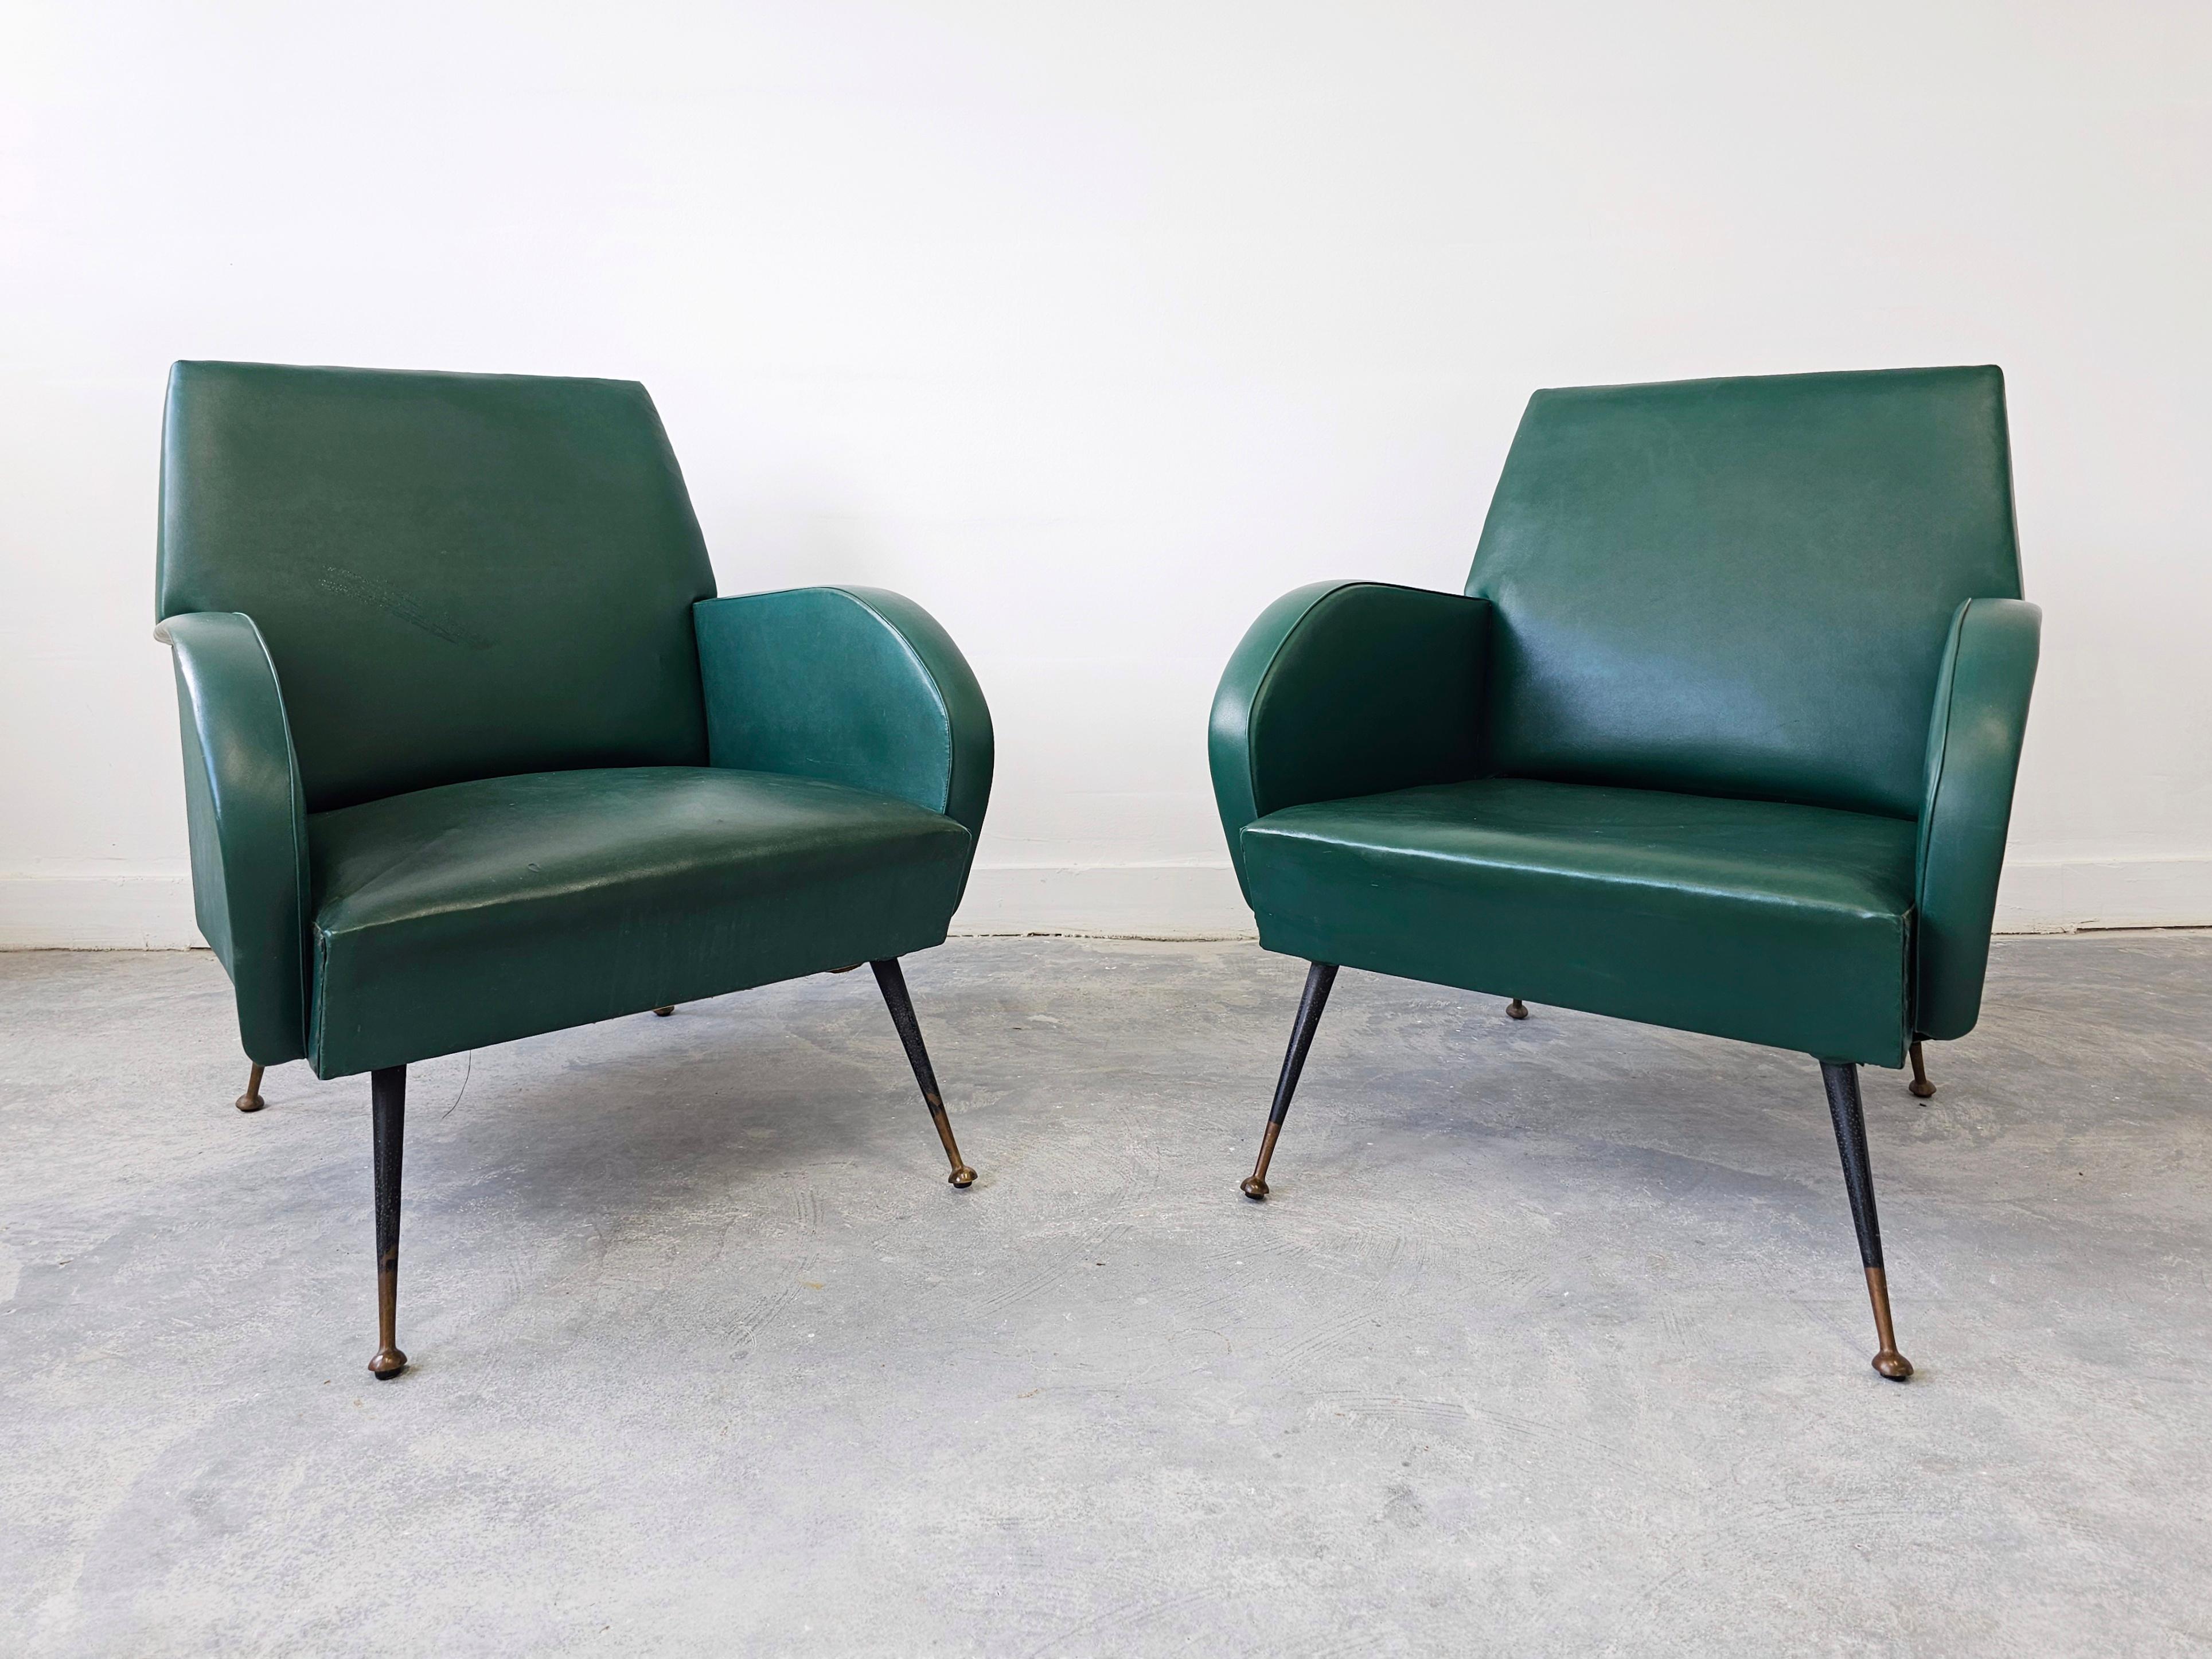 In this listing you will find a pair of Mid Century Modern Armchairs designed in style of Marco Zanuso's 